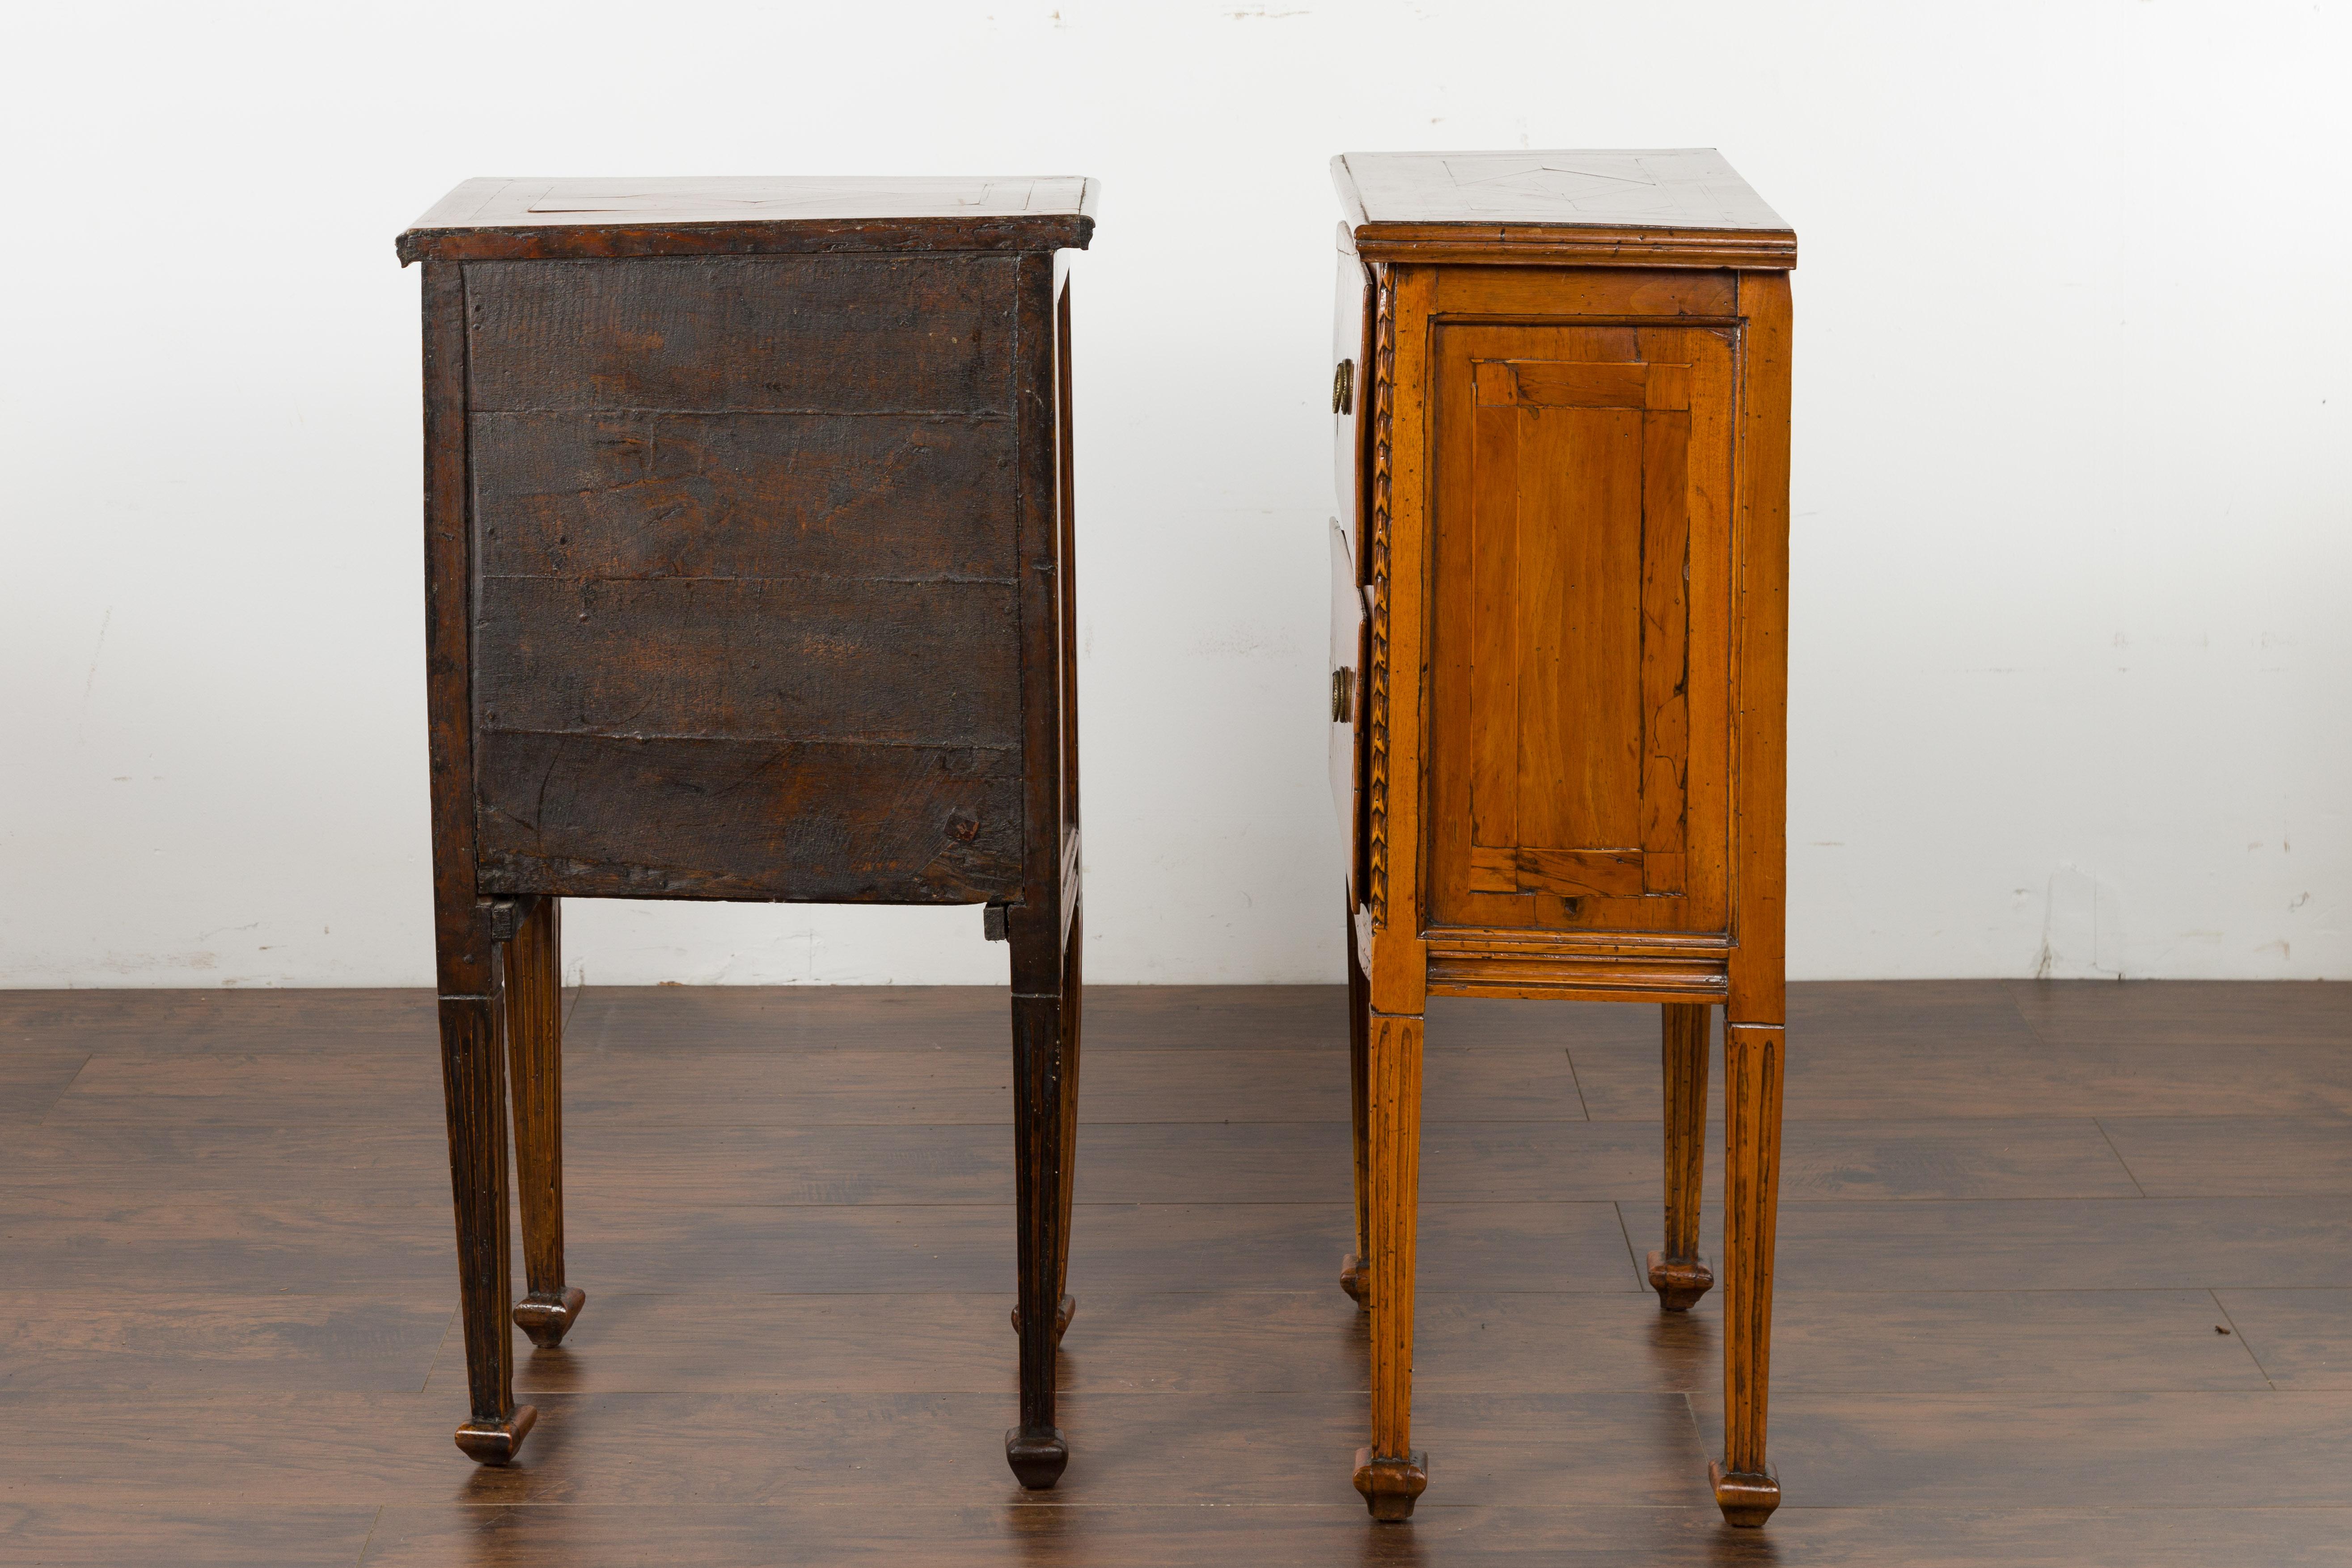 Pair of Italian 1820s Neoclassical Period Walnut Bedside Tables with Two Drawers For Sale 6